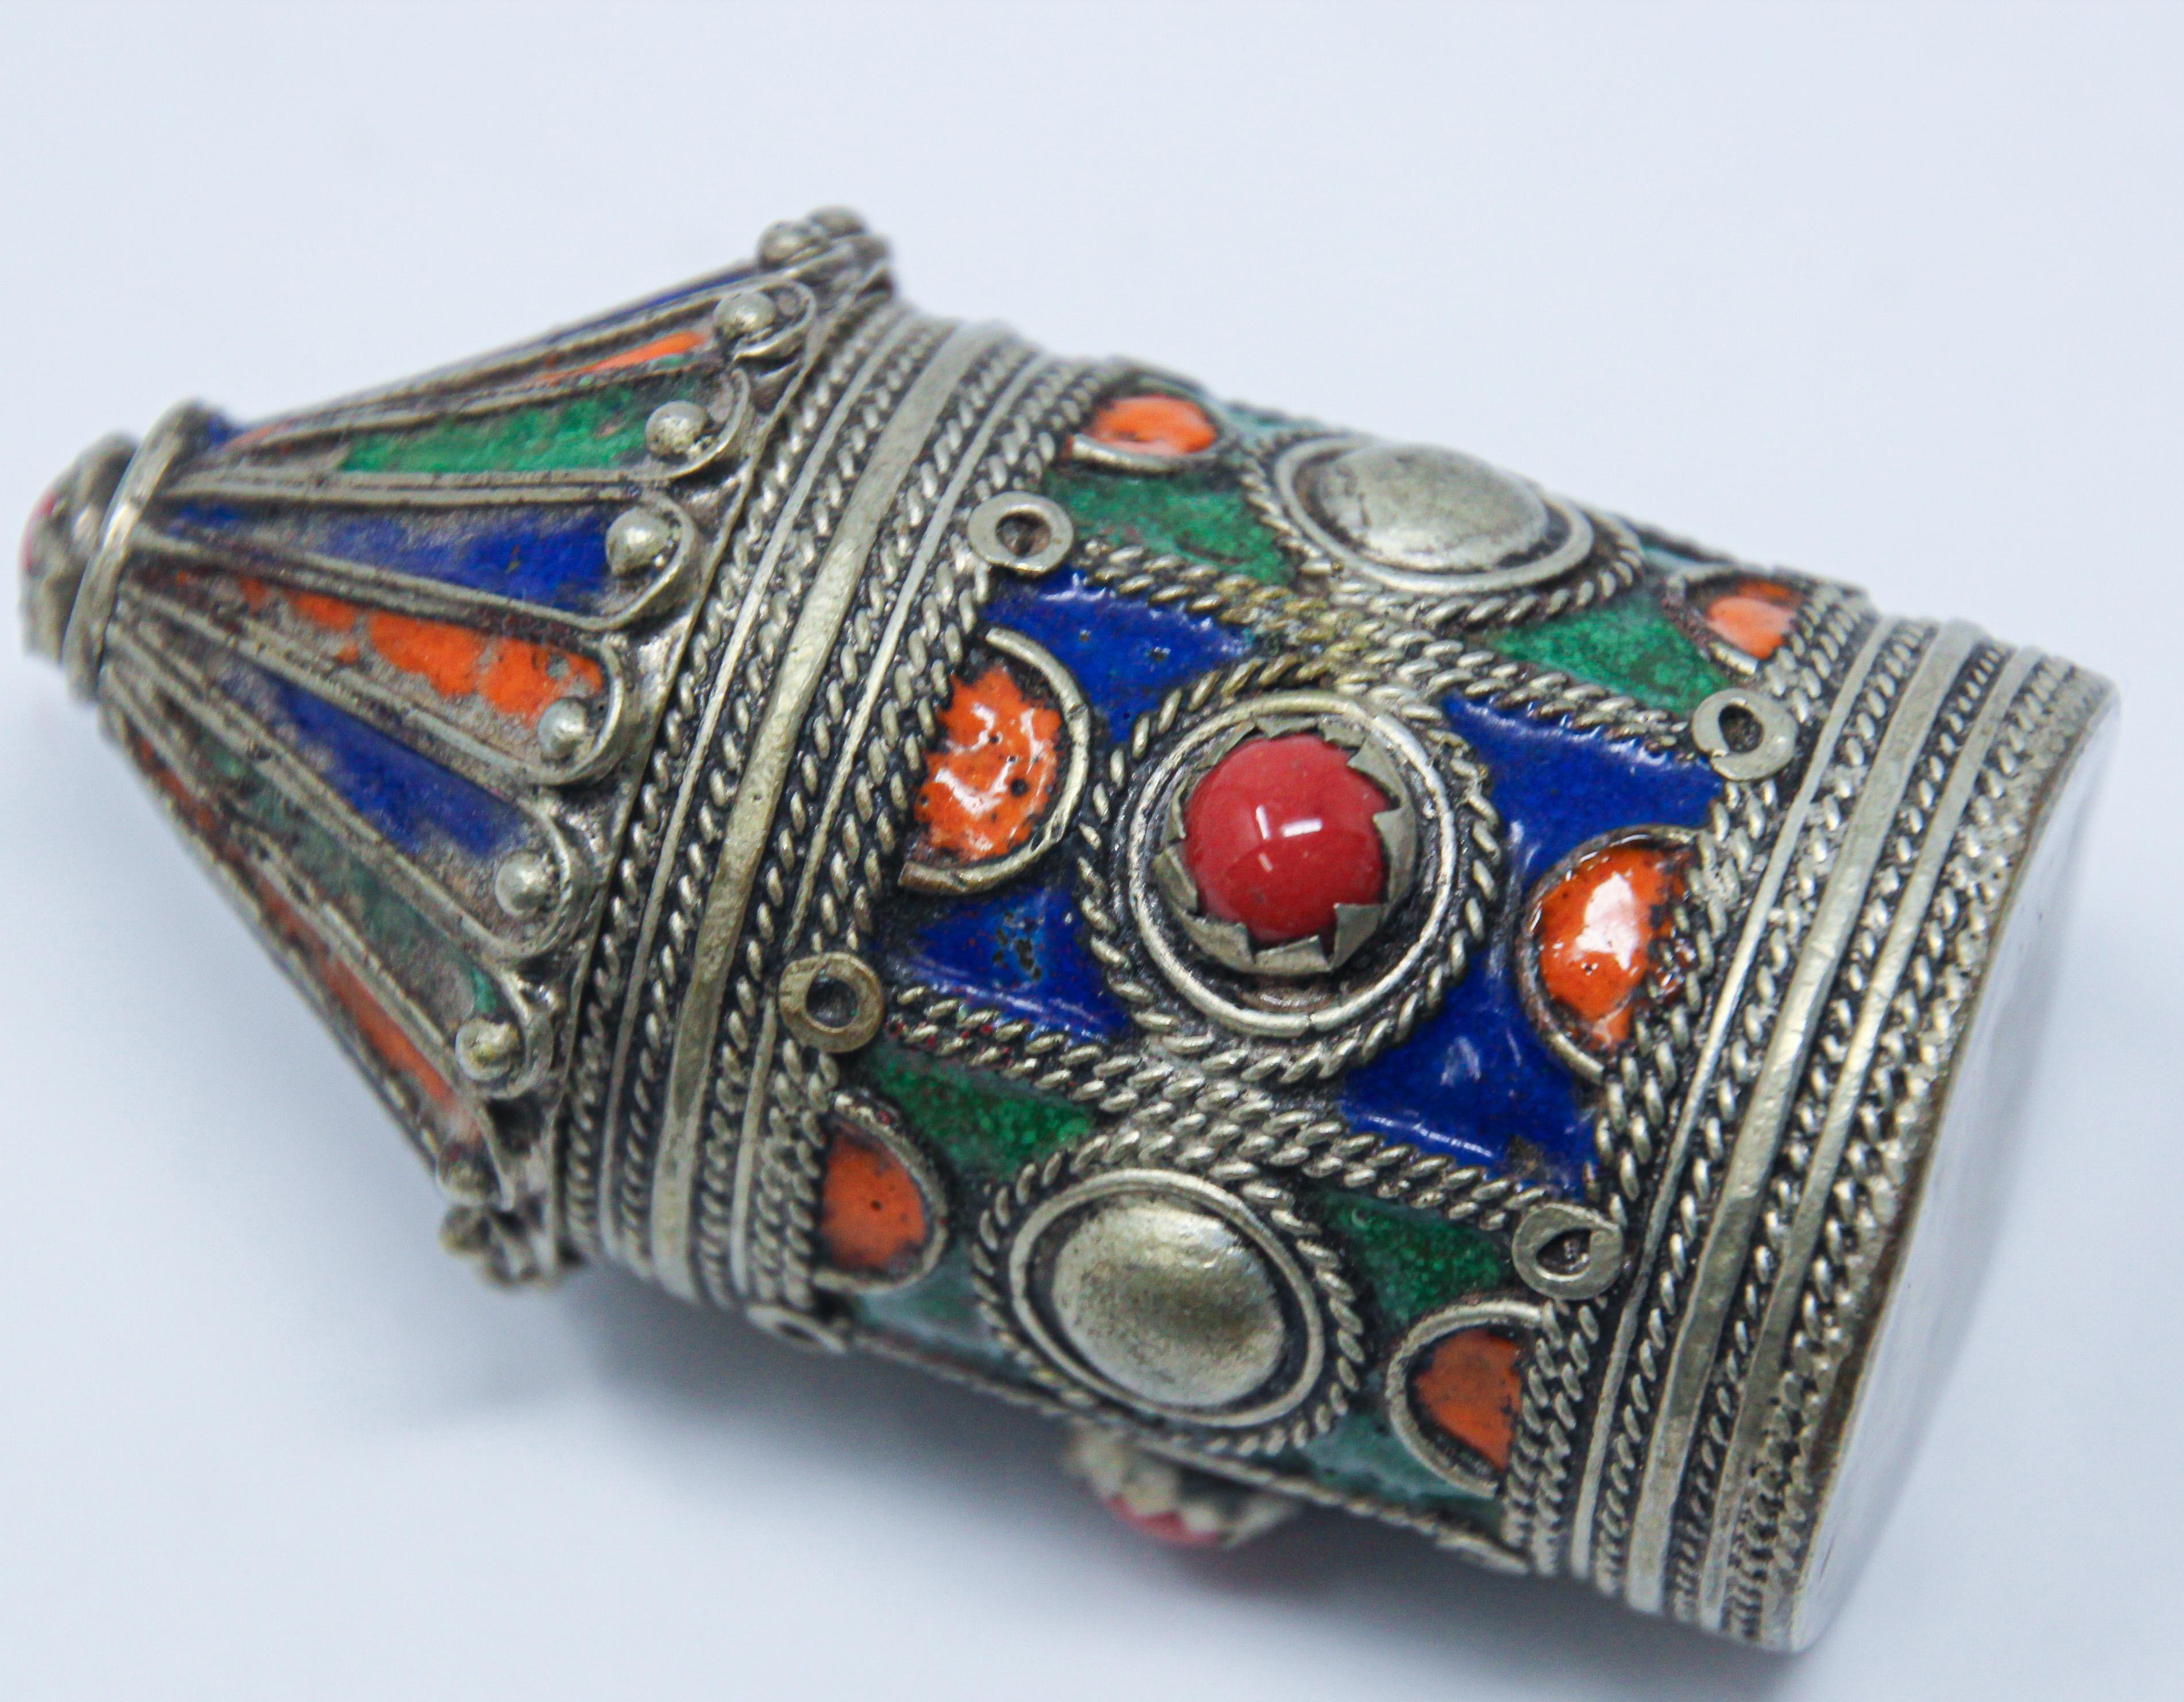 Antique Silver Enameled Powder Kohl Container Box from Kabylie, Algeria For Sale 7